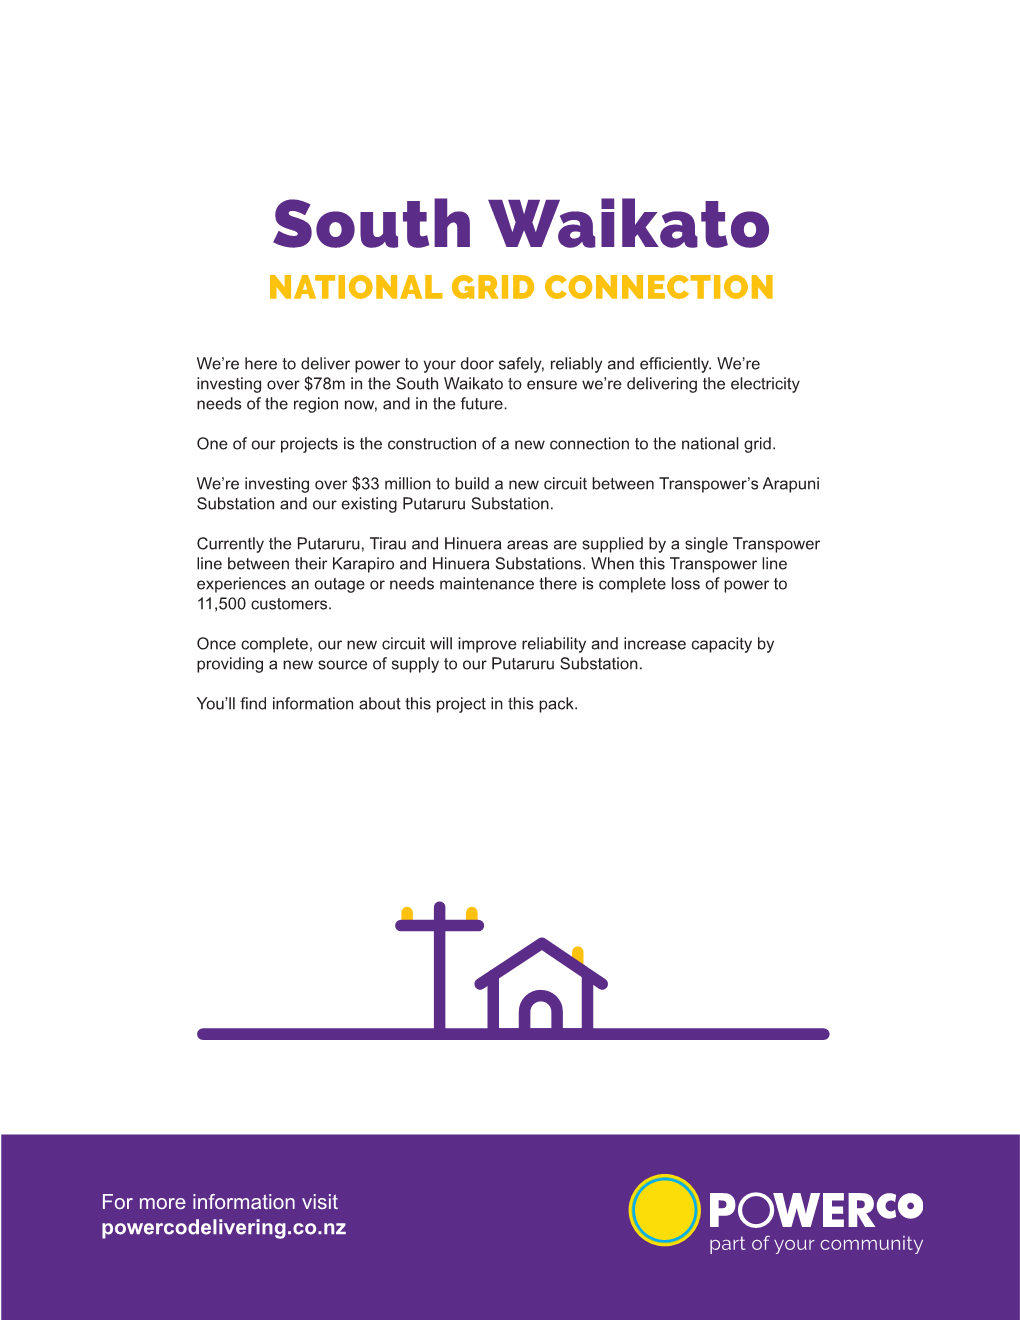 South Waikato NATIONAL GRID CONNECTION